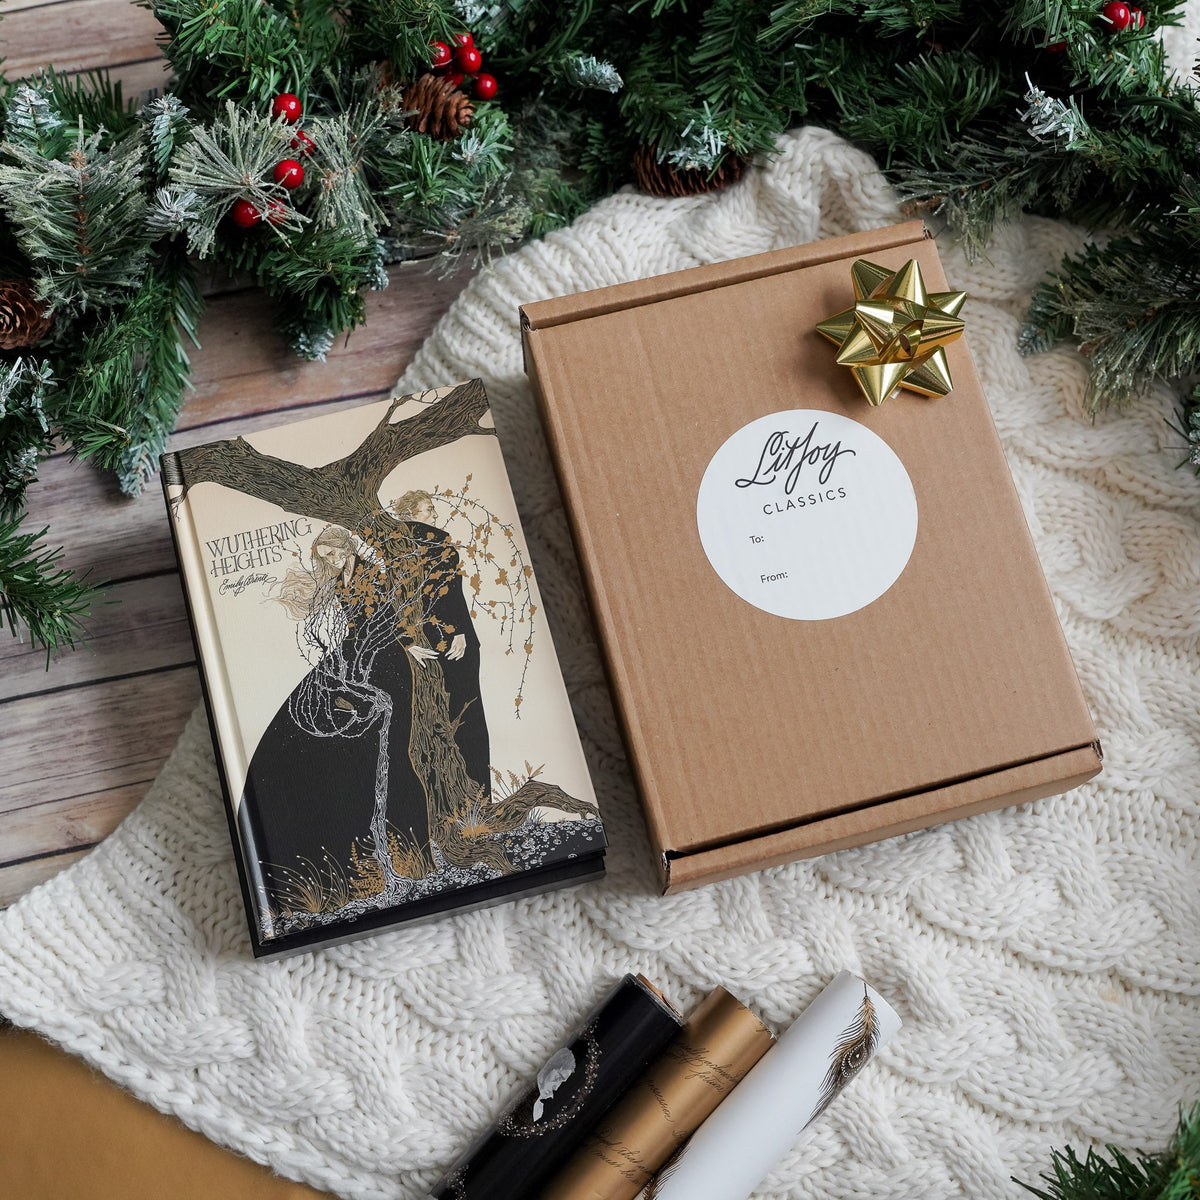 Wuthering Heights Gift Box with a notebook, pen, candle, woodmark, and book by Emily Brontë